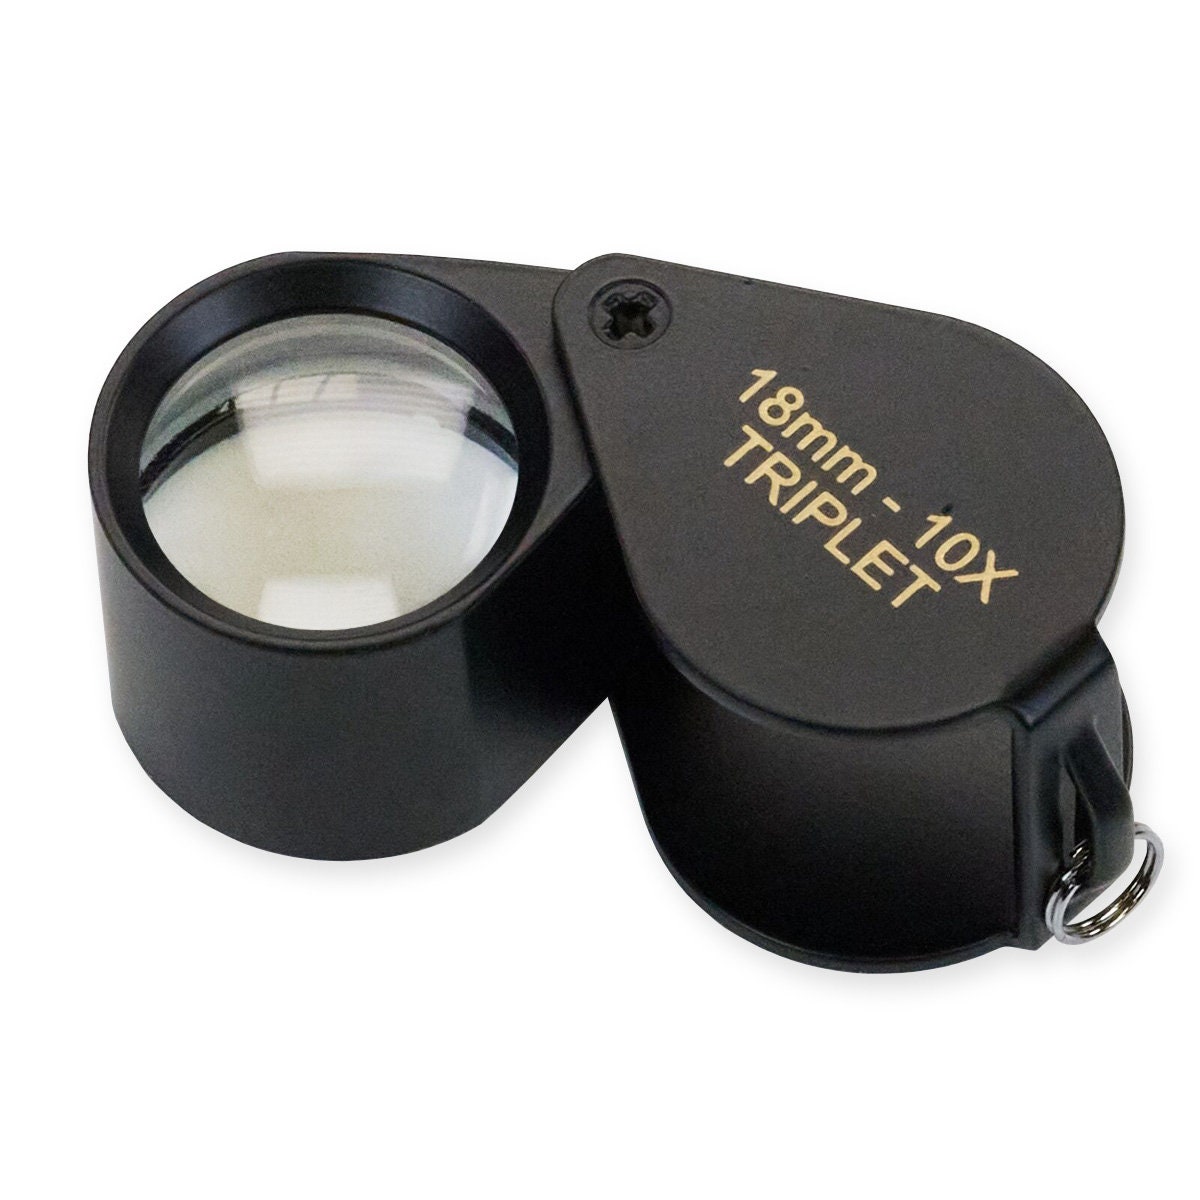 7X Power, 1-1/2 Focal Length Plastic Eye Loupe Magnifier Jewelry